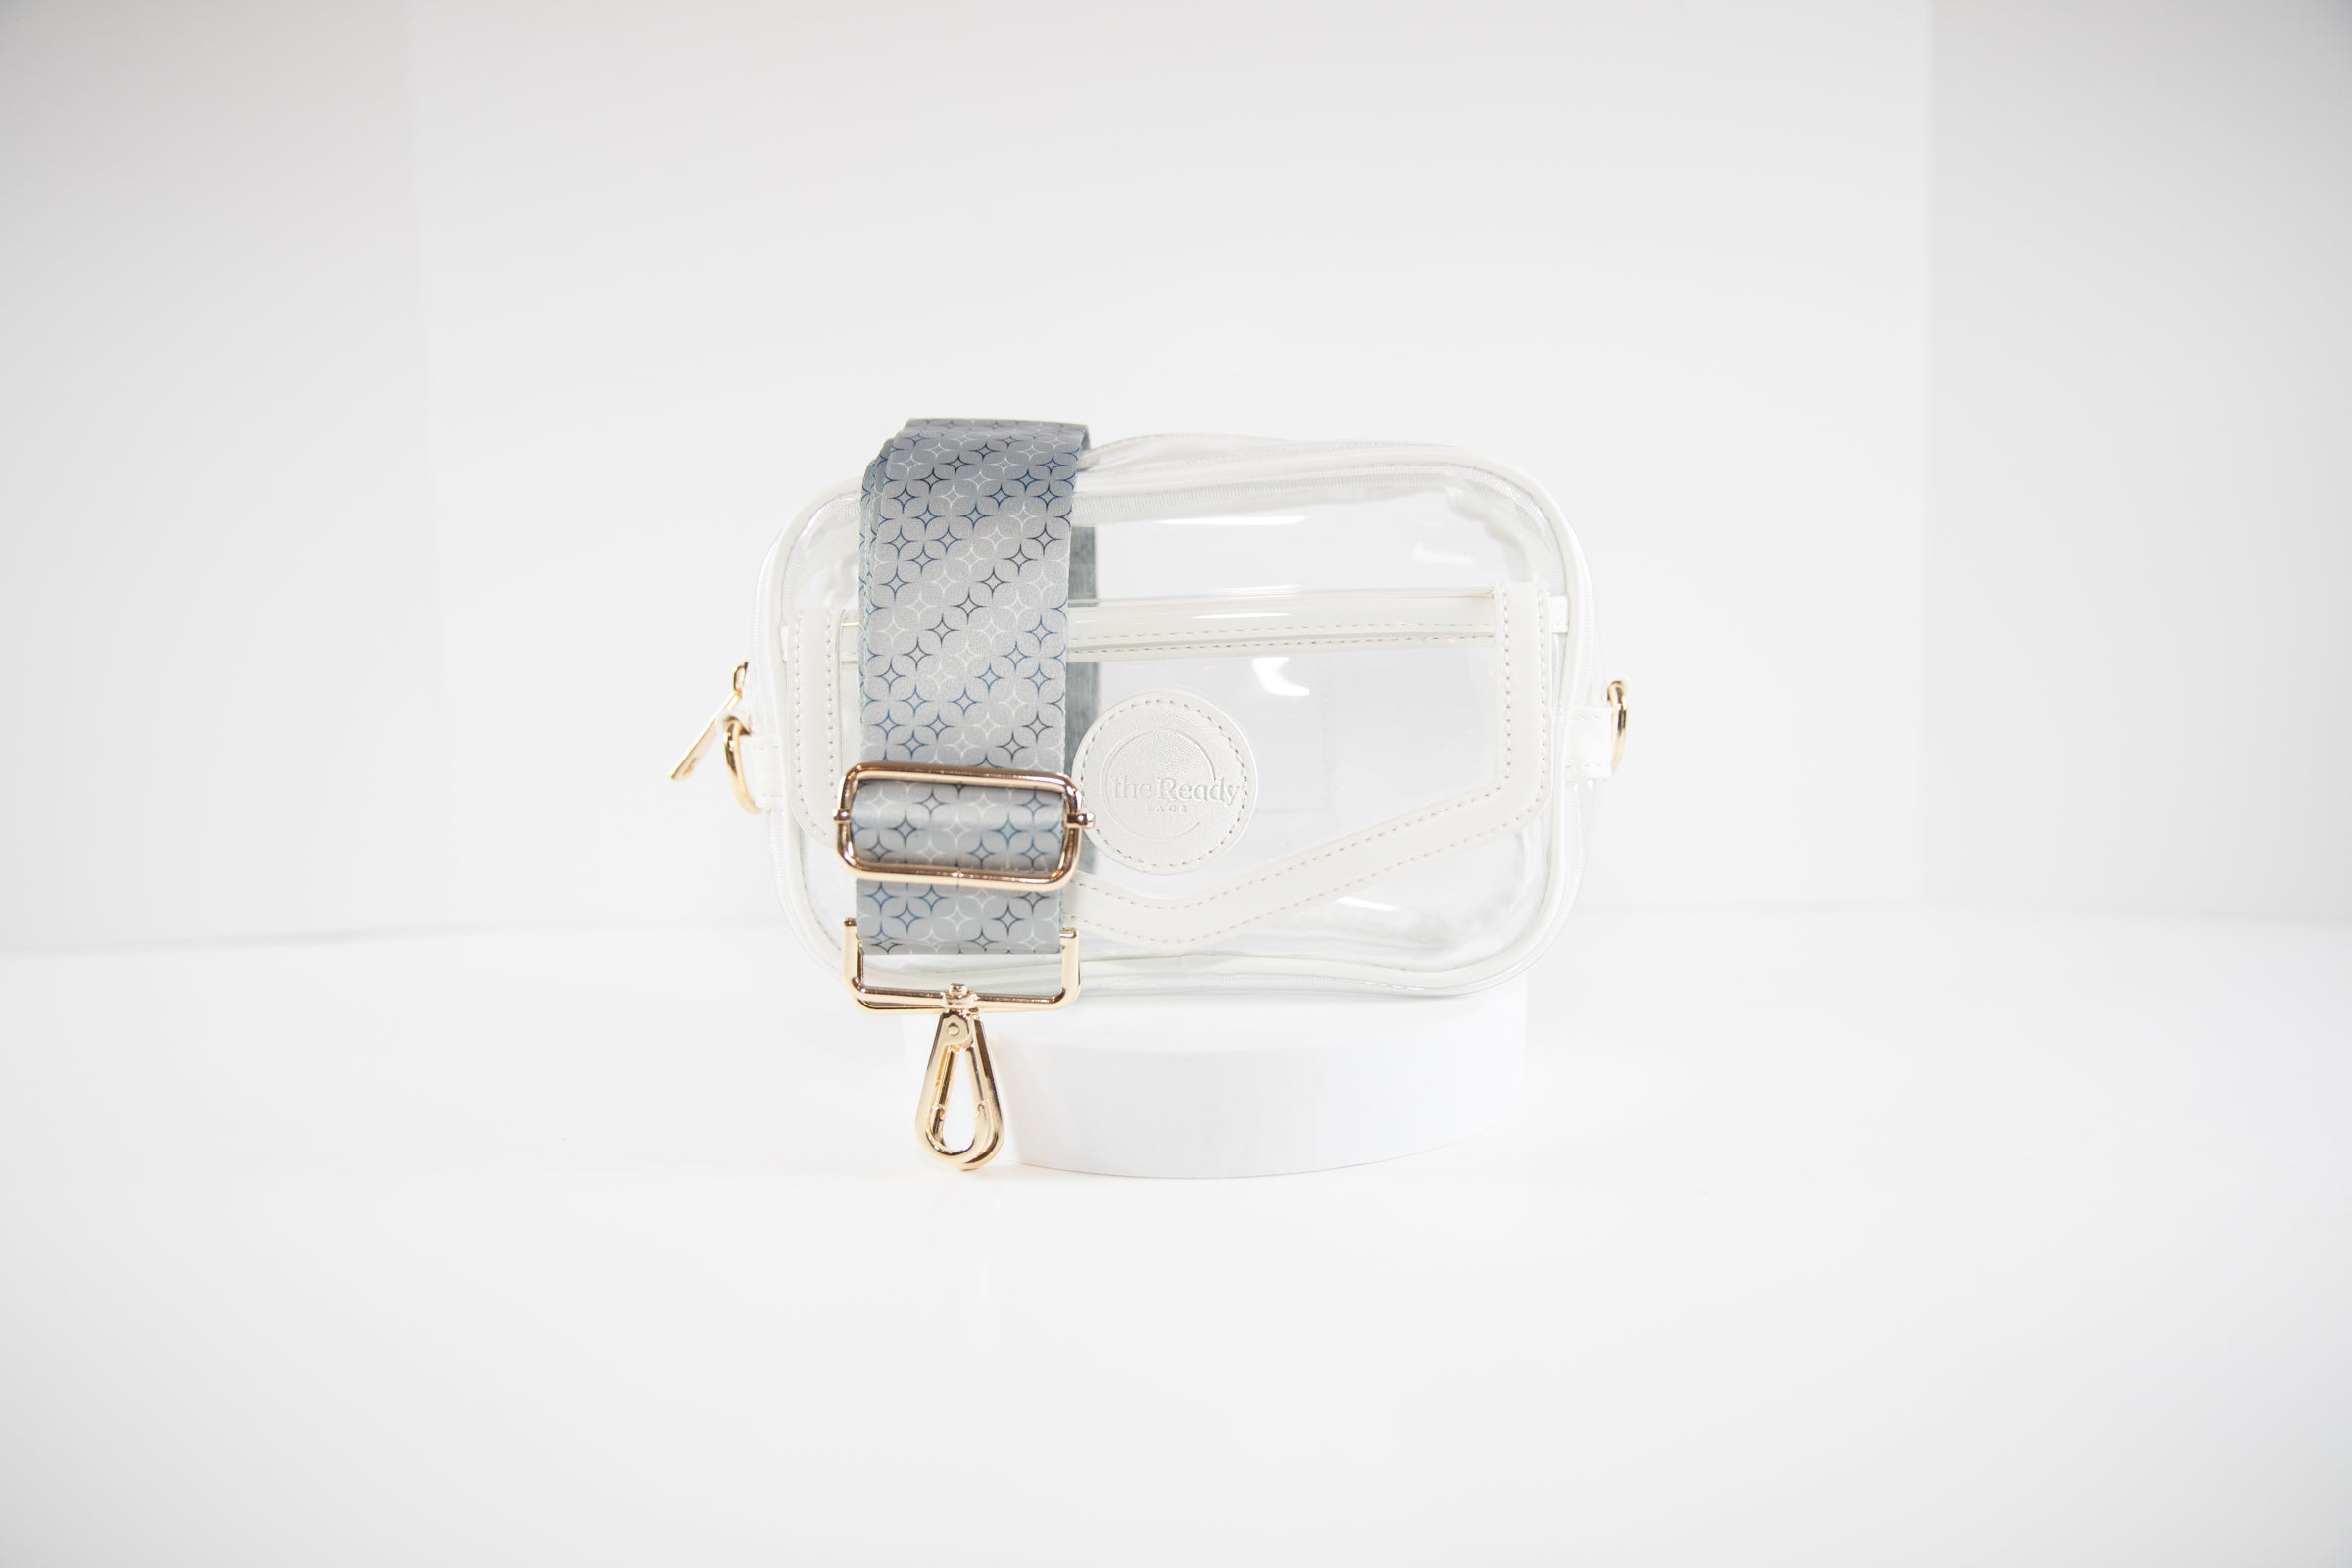 Clear stadium bag in white leather trim shown with a crossbody strap in NY Yankees team colors.